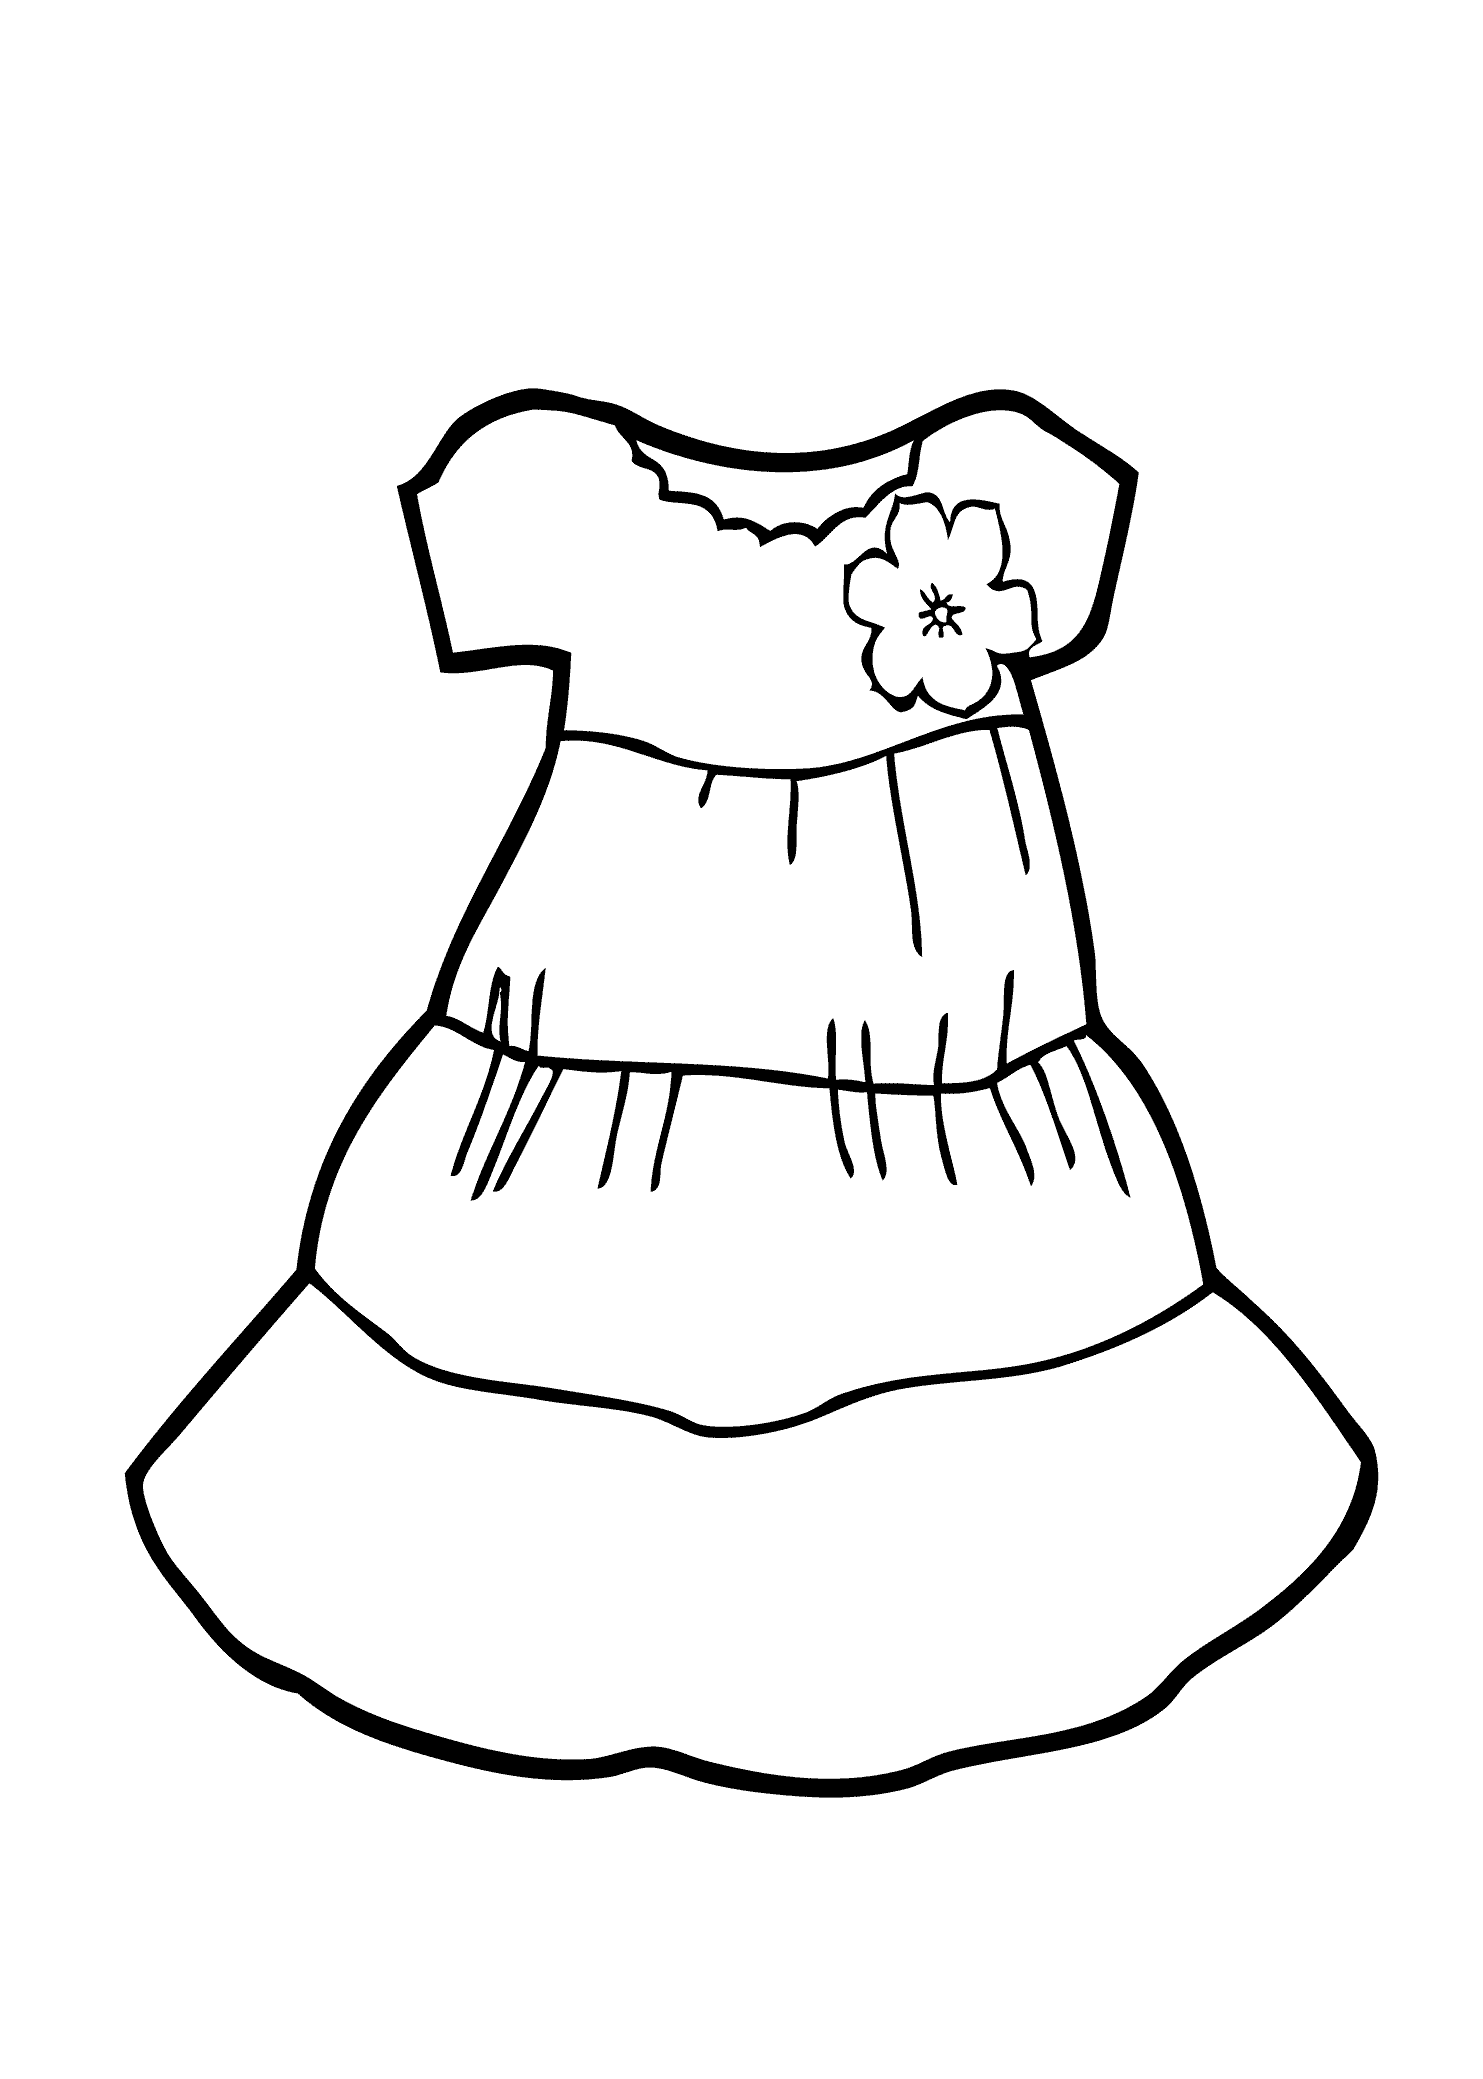 Light dress coloring page for girls, printable free | Summer coloring pages,  Coloring pages for girls, Baby coloring pages